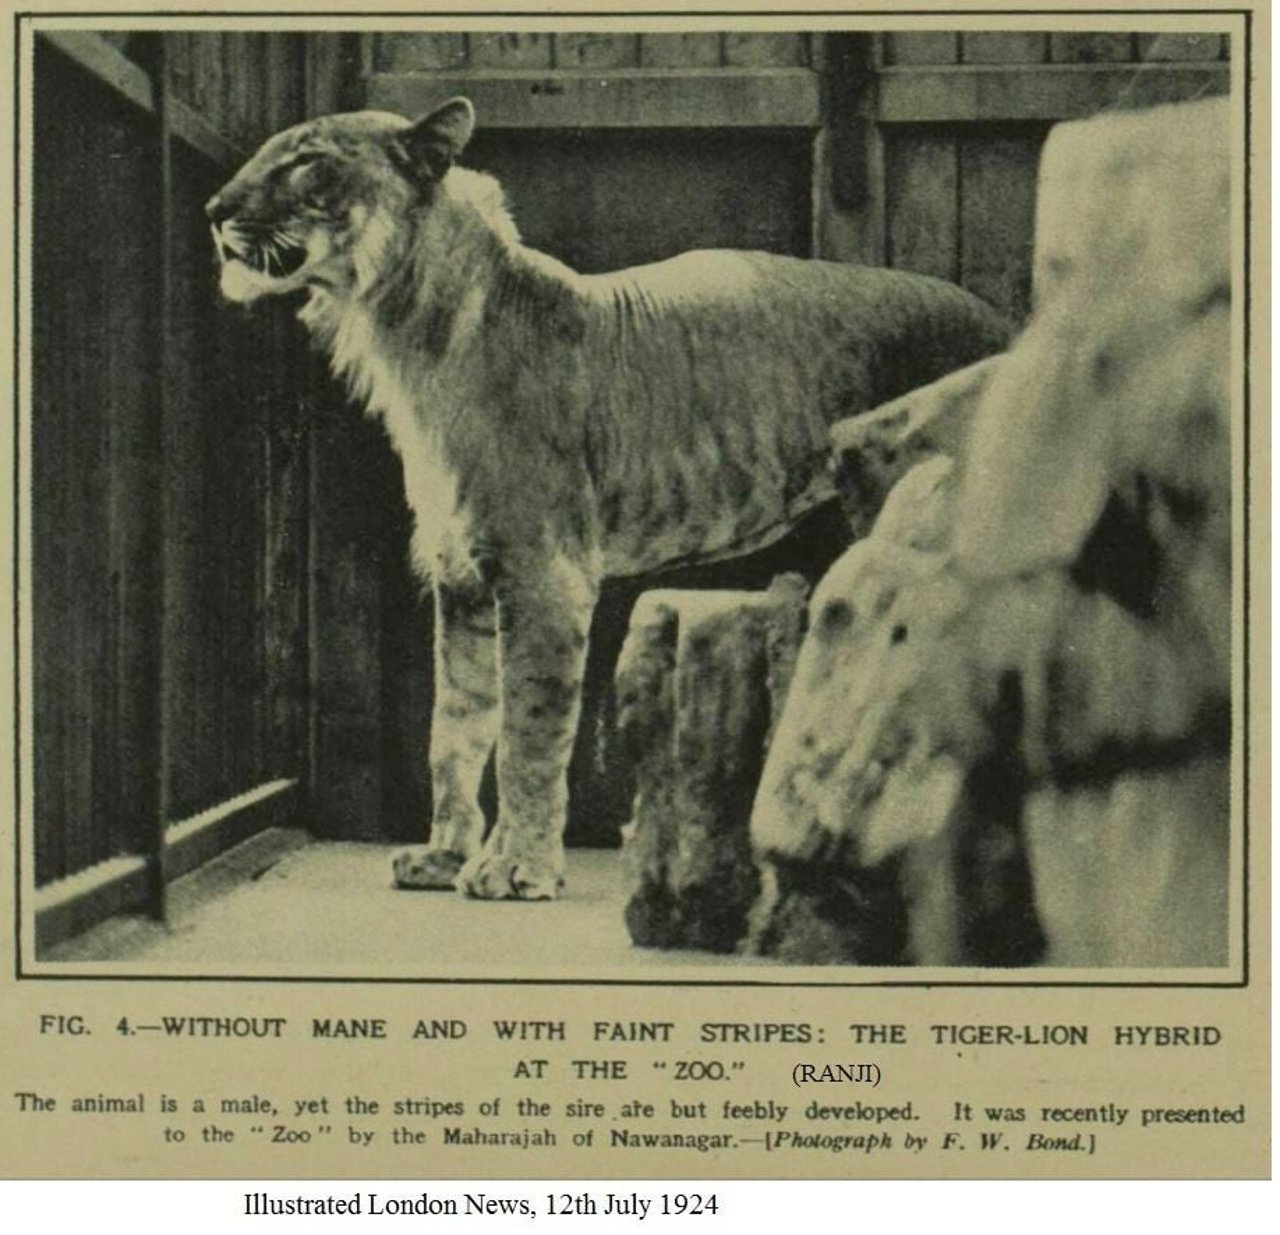 Ranji, the lion-tiger hybrid bred by Jam Sahib, the Maharajah of Nawanagar and presented to London Zoo. Photo: Illustrated London News 1924 discovered by Sarah Hartwell